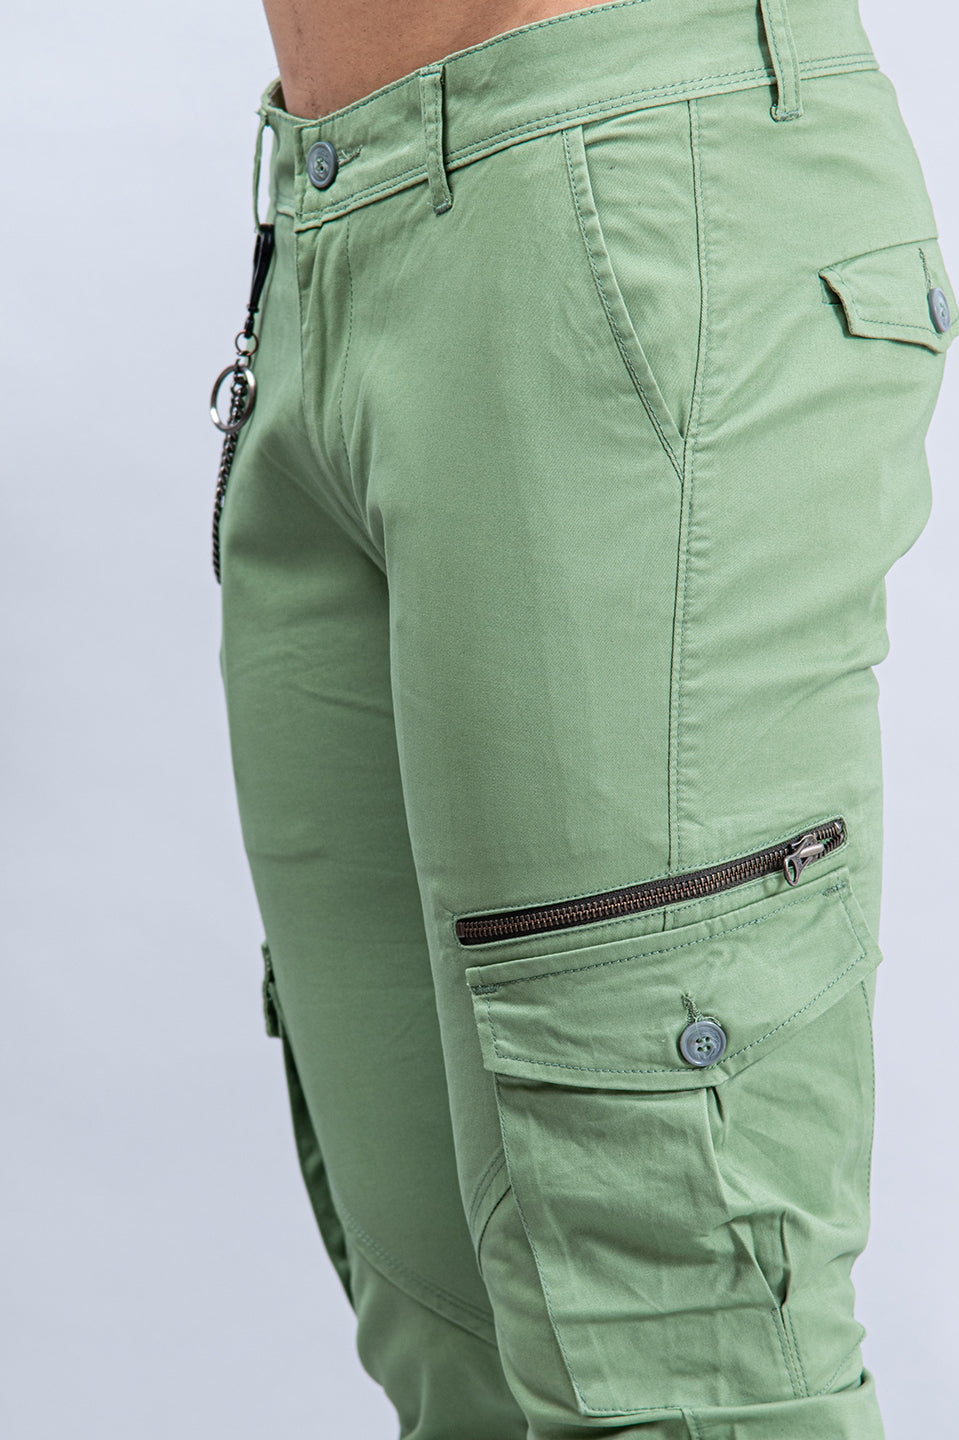 solid green cargo pants